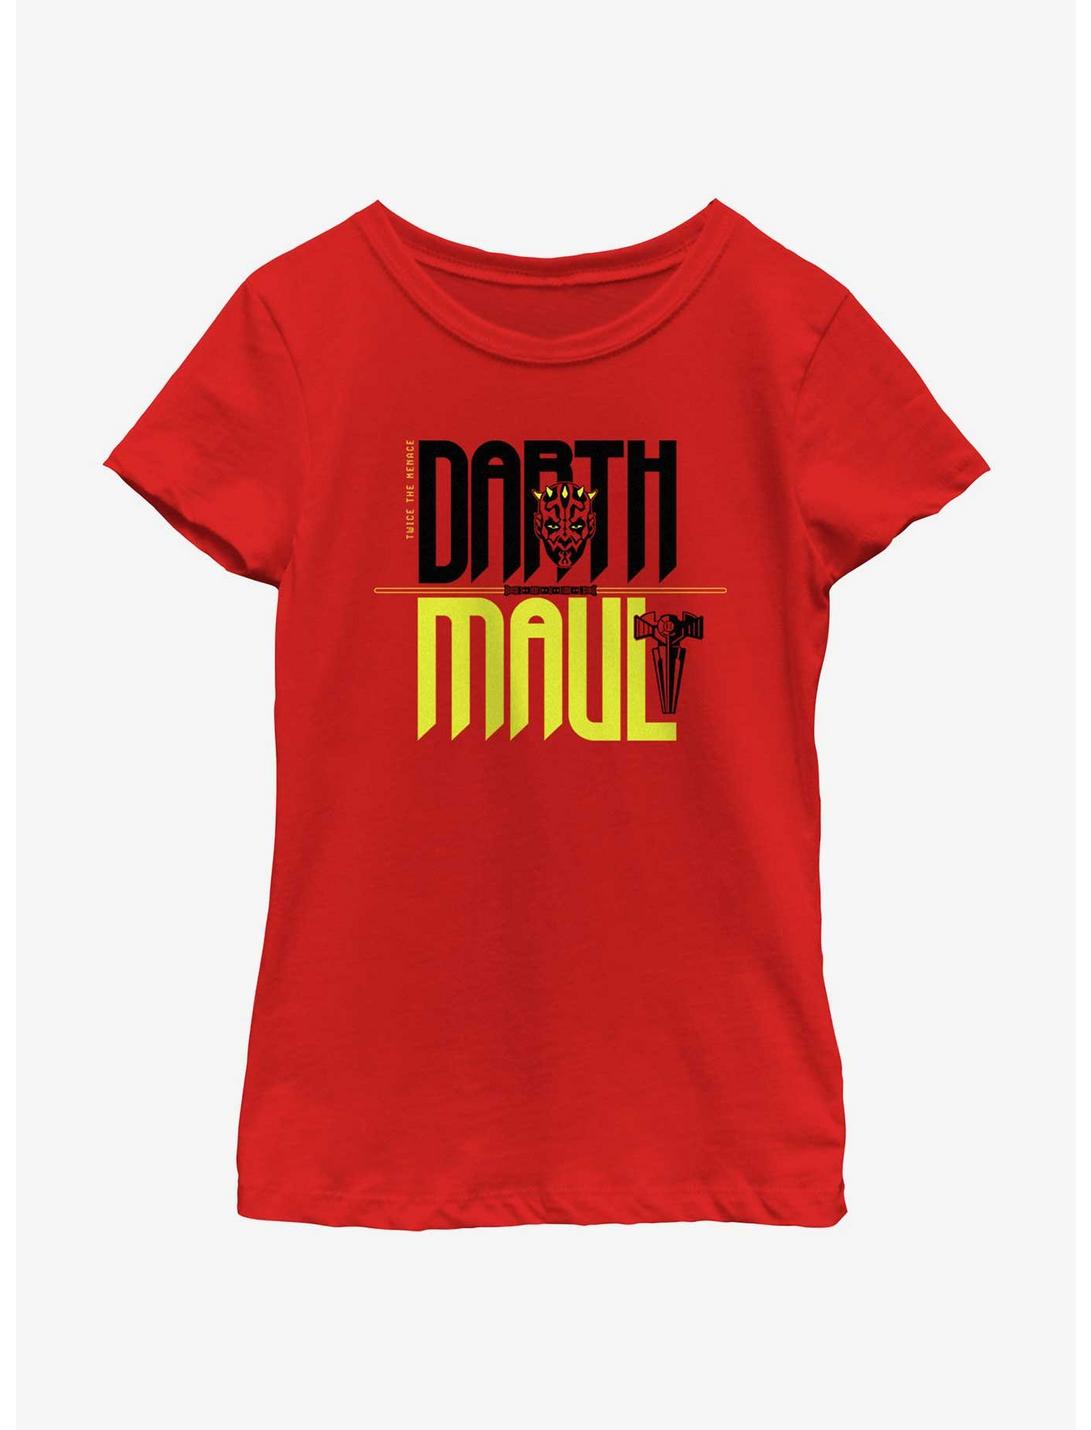 Star Wars Twice The Menace Darth Maul Youth Girls T-Shirt, RED, hi-res